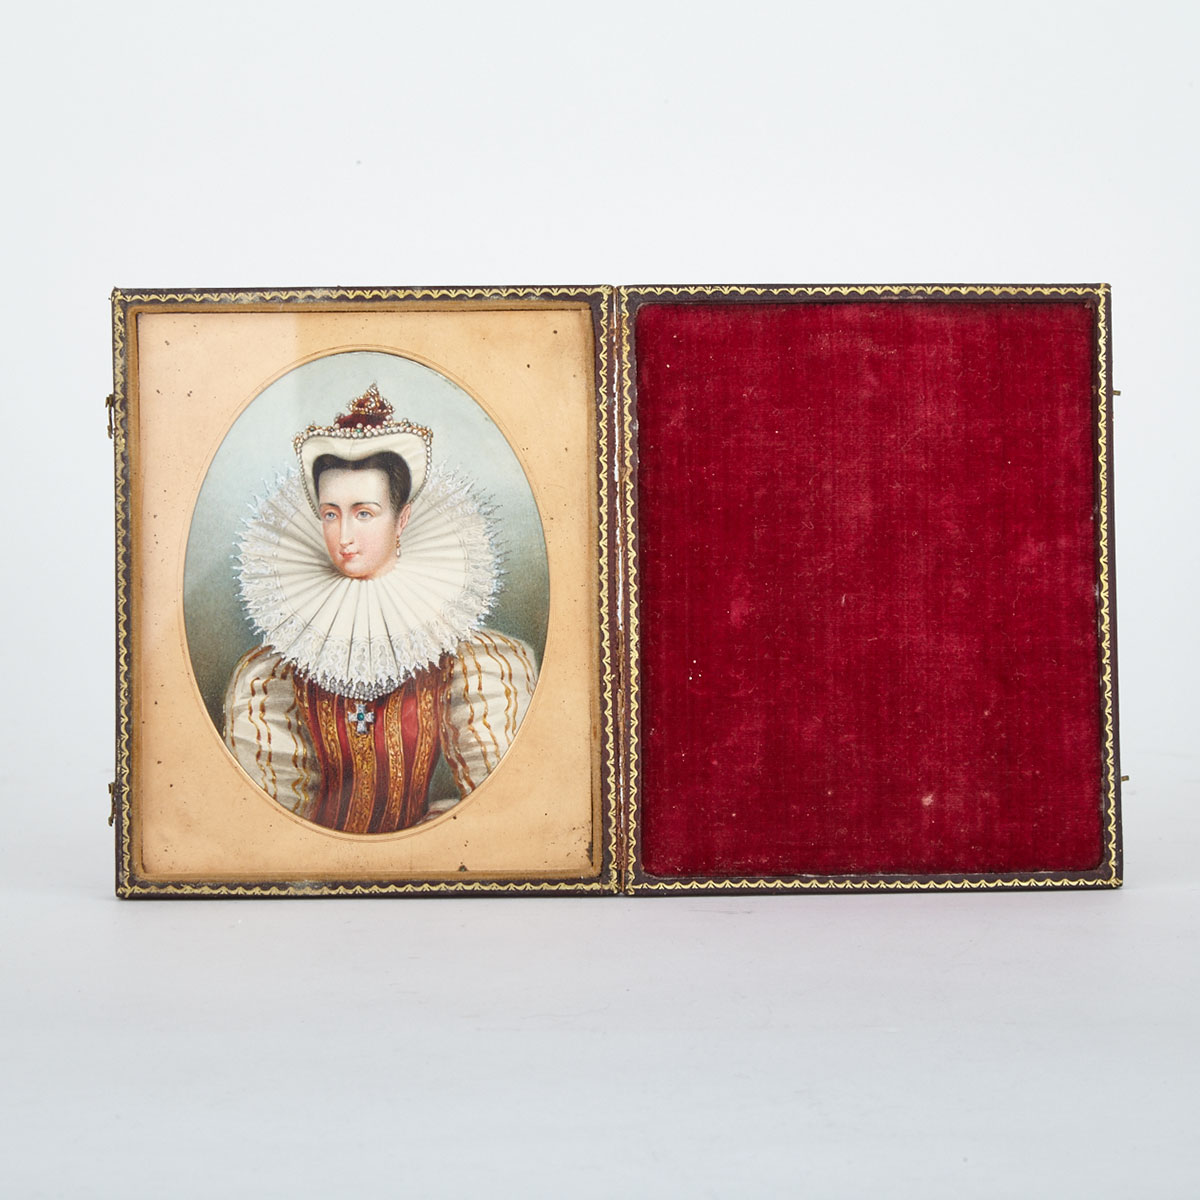 Portrait Miniature of Marina Miniszech After the work by Antoine Maurin (1793-1860), 19th century